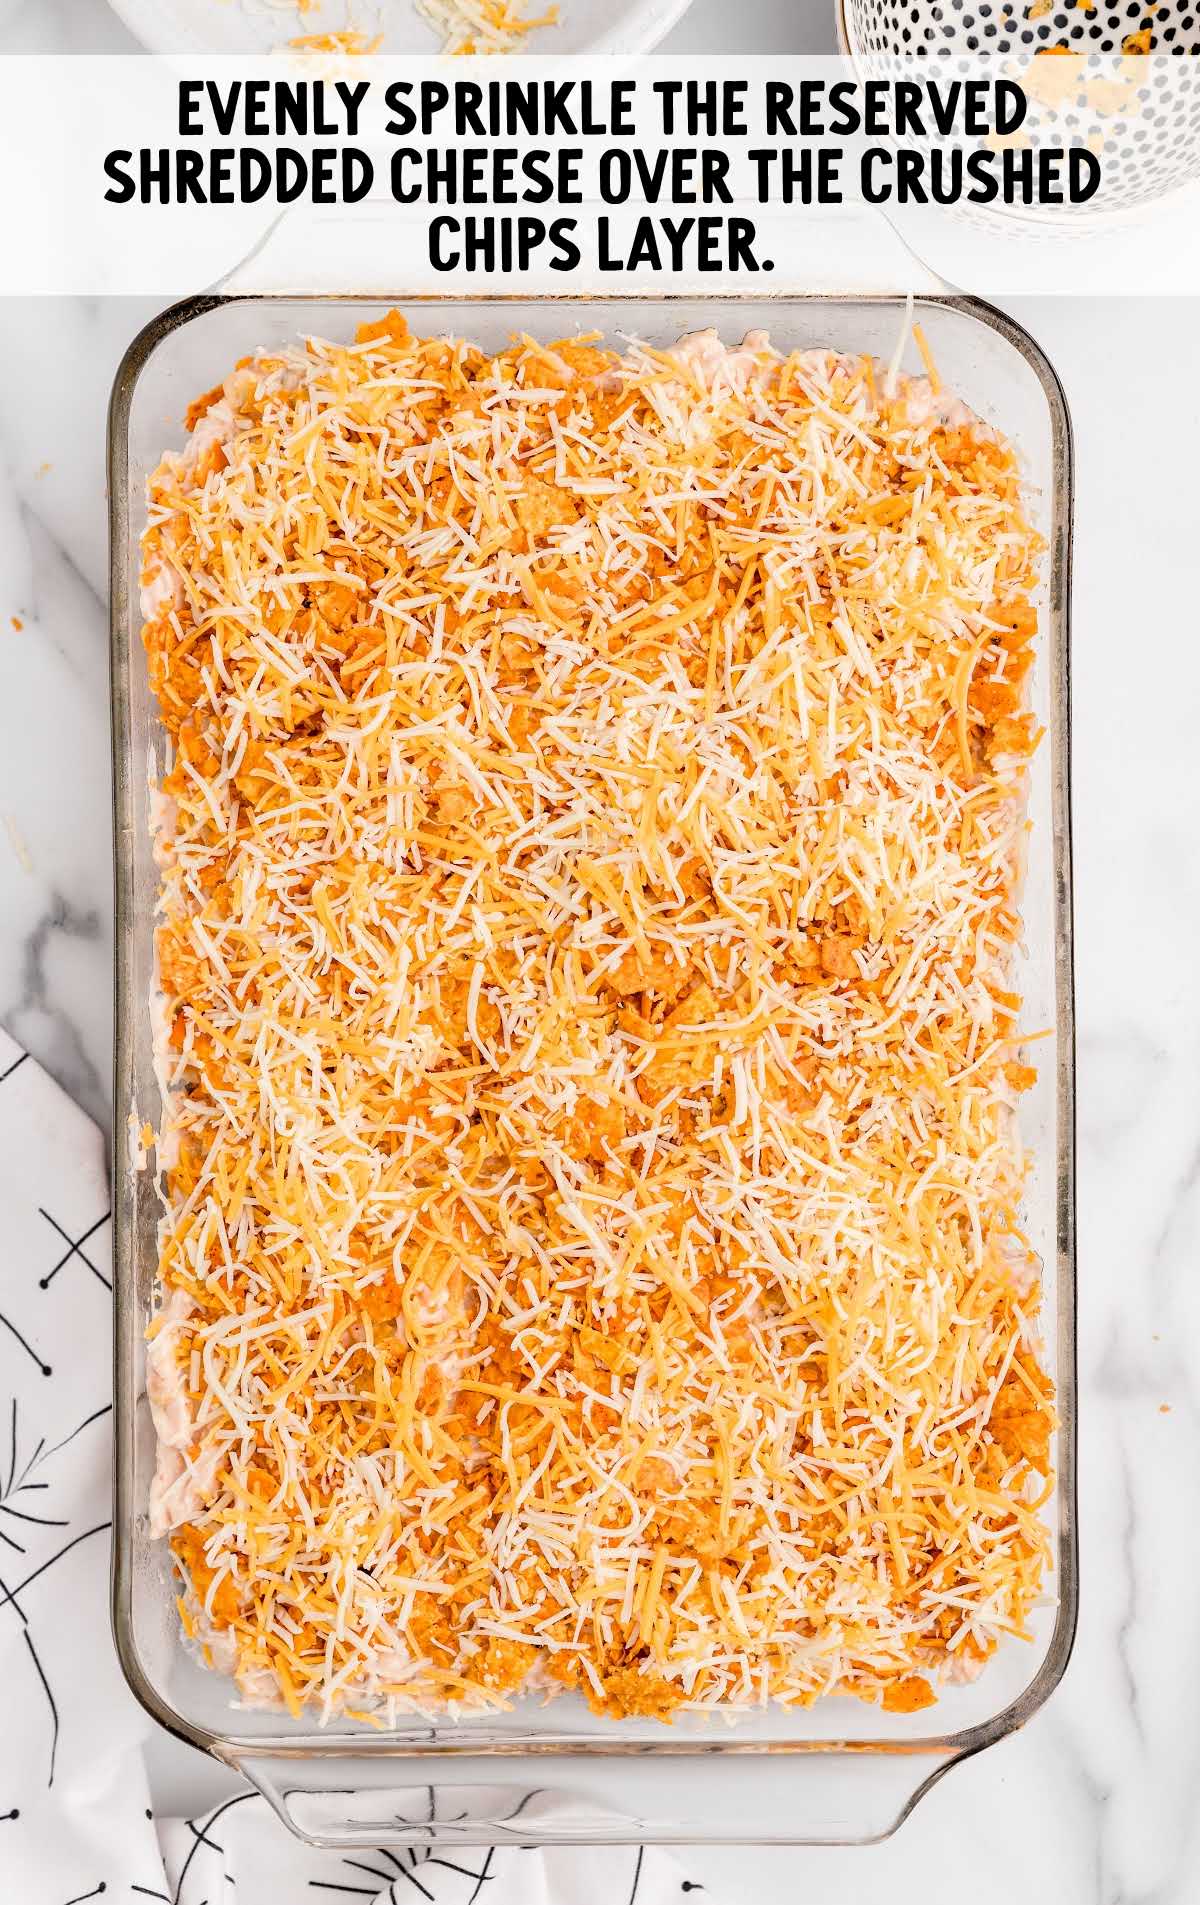 Doritos Cheesy Chicken Casserole process shot of shredded cheese sprinkled on top of the crushed Doritos